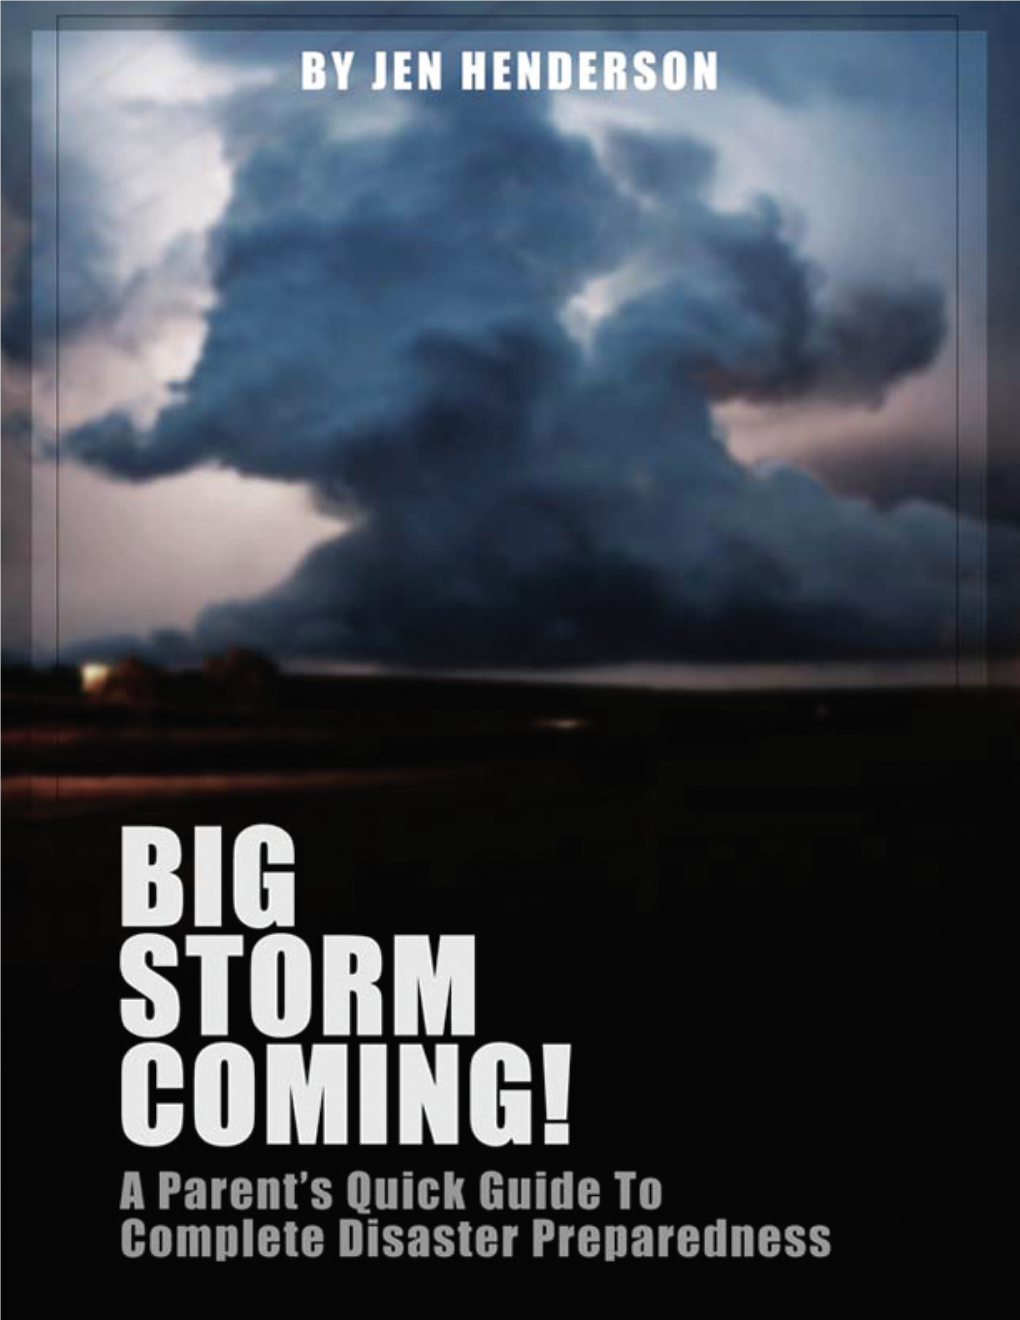 About Big Storm Coming! a Parent’S Quick Guide to Complete Disaster Preparedness